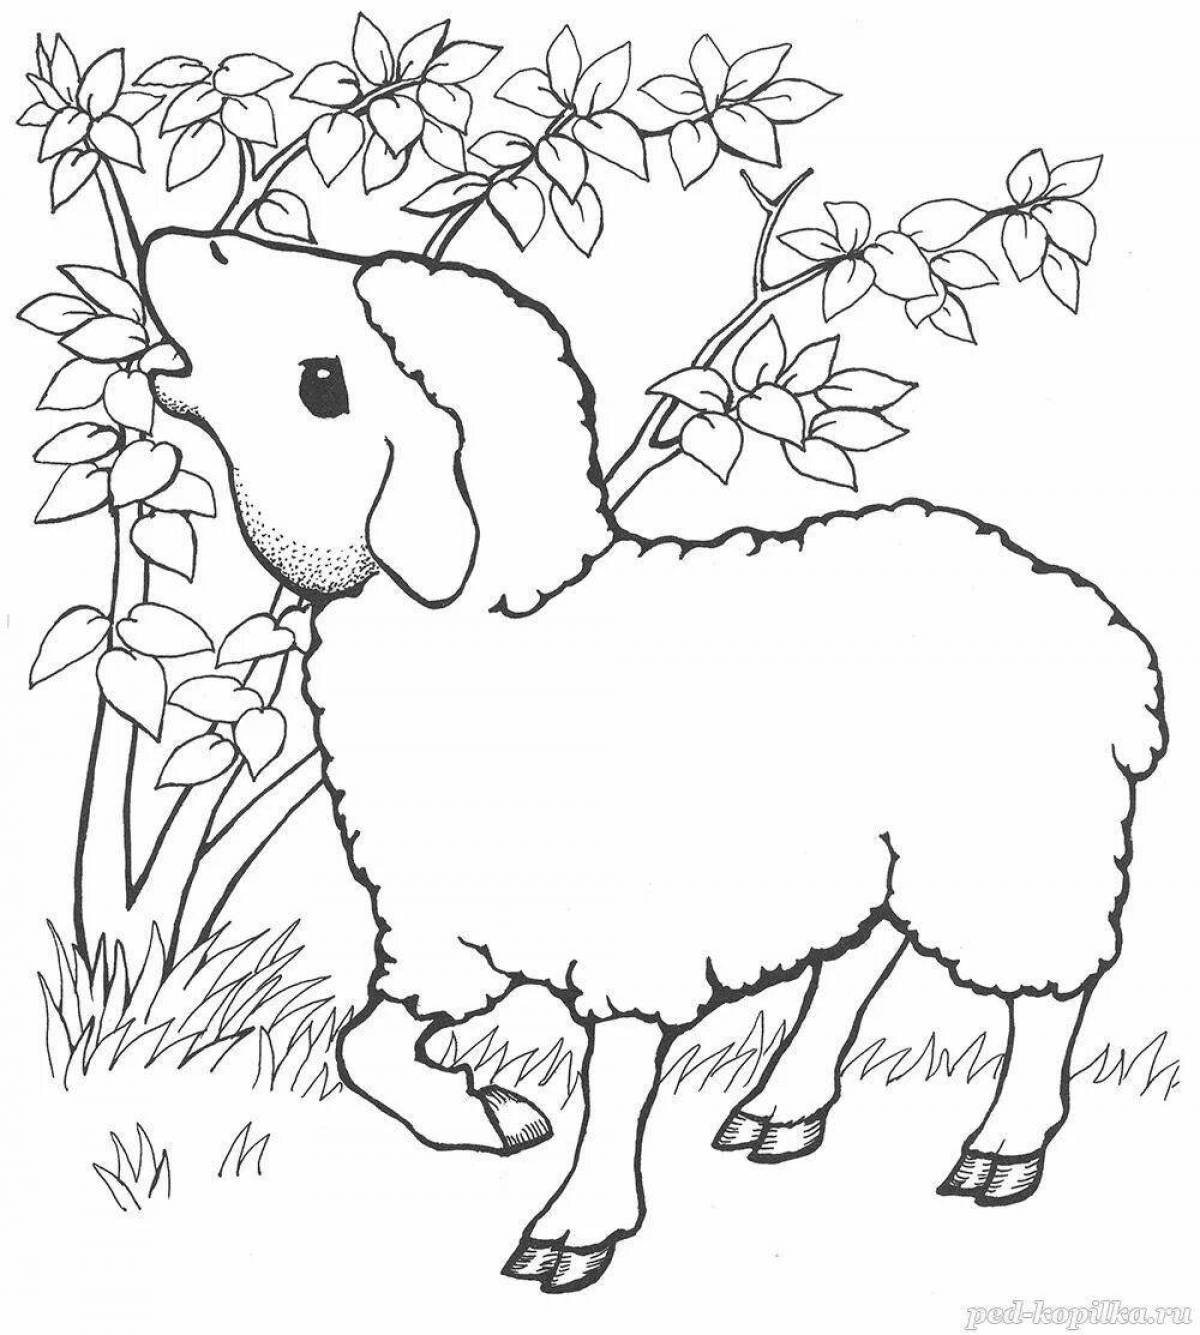 Great sheep coloring book for 5-6 year olds